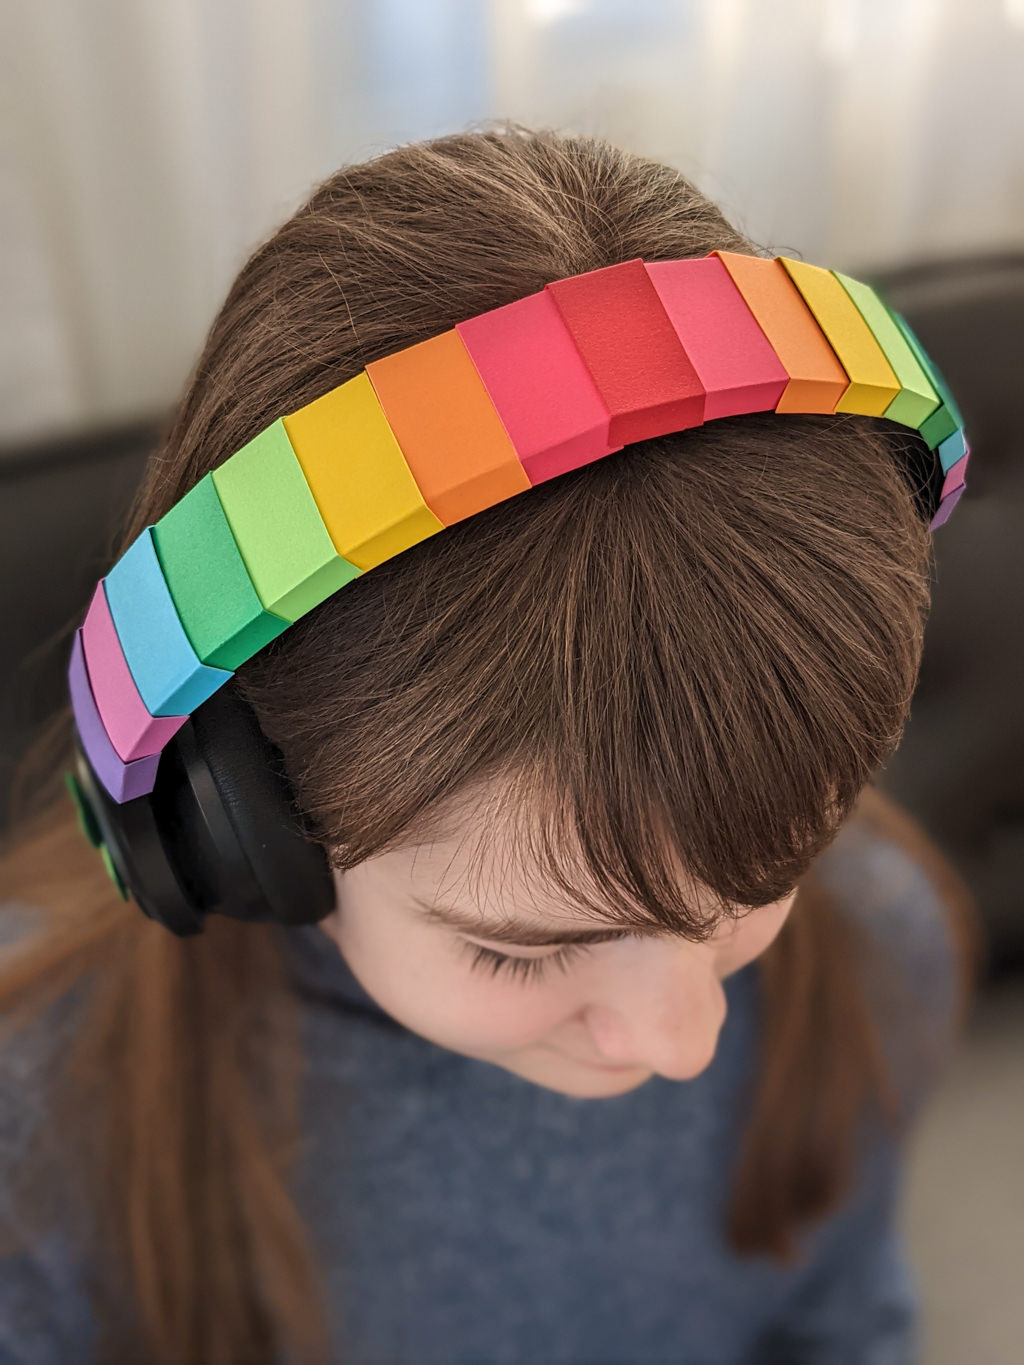 Rainbow headphones craft idea for kids for St. Patrick's Day